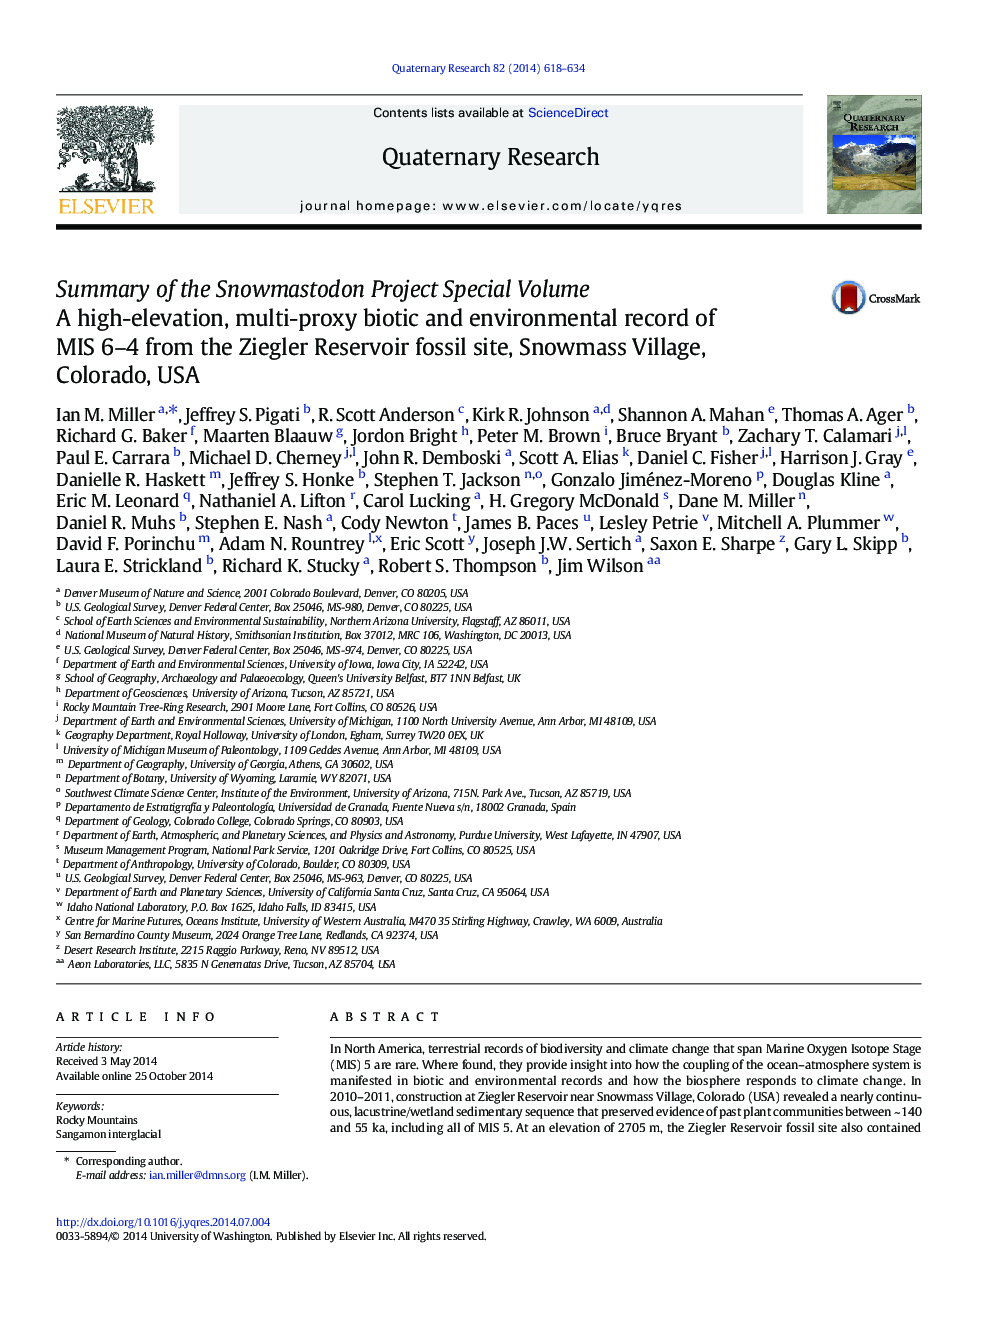 Summary of the Snowmastodon Project Special Volume: A high-elevation, multi-proxy biotic and environmental record of MIS 6–4 from the Ziegler Reservoir fossil site, Snowmass Village, Colorado, USA